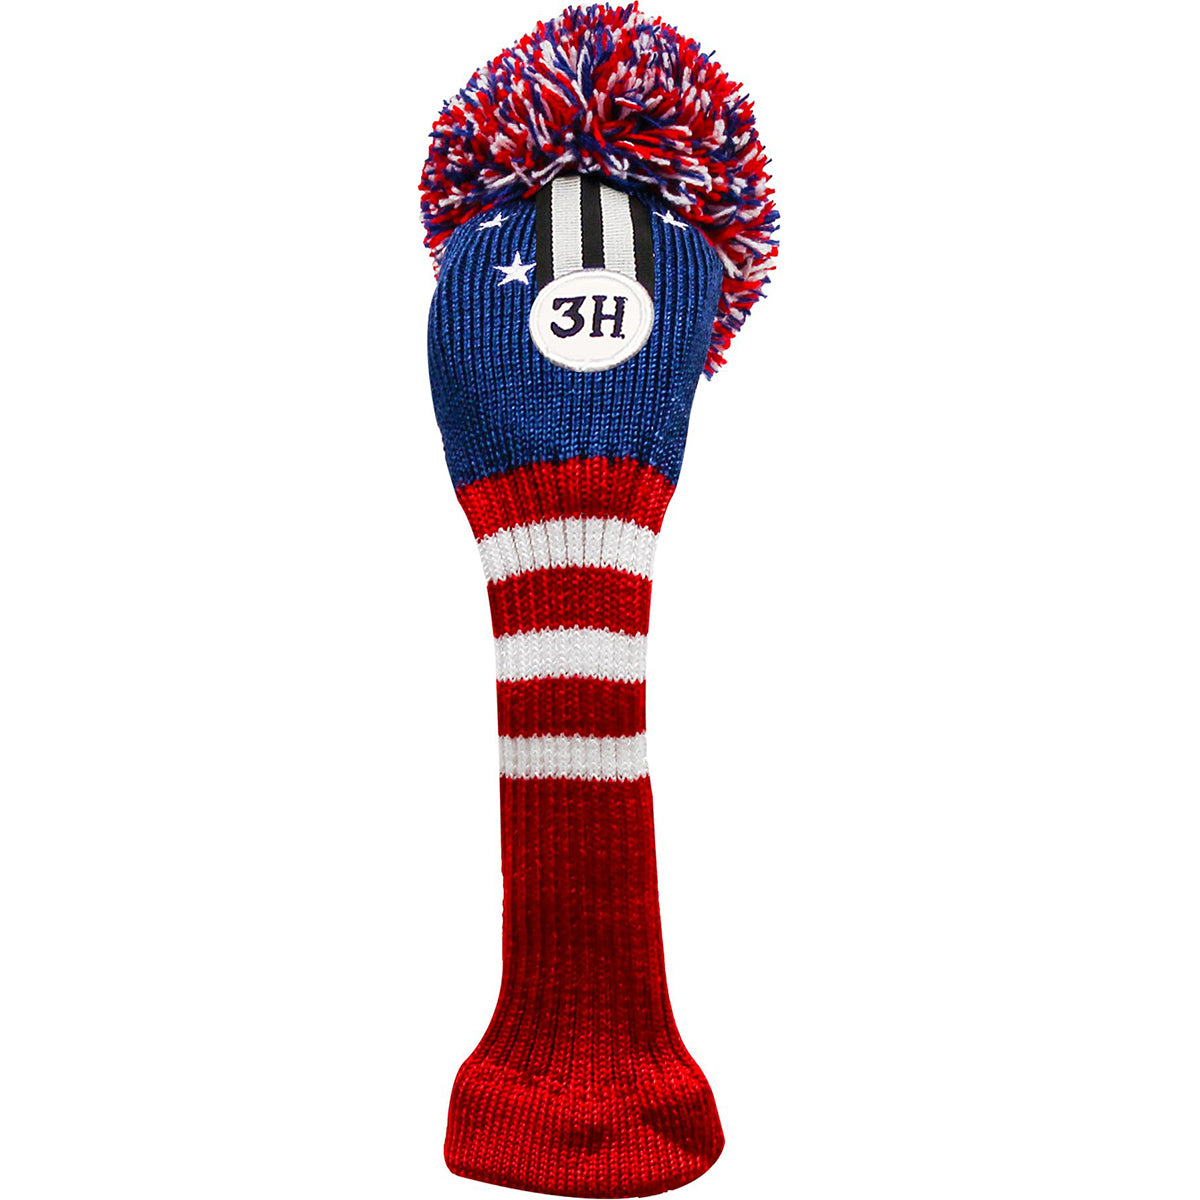 IZZO Vintage Knitted Golf Club Headcover - Red/White/Blue IZZO Golf